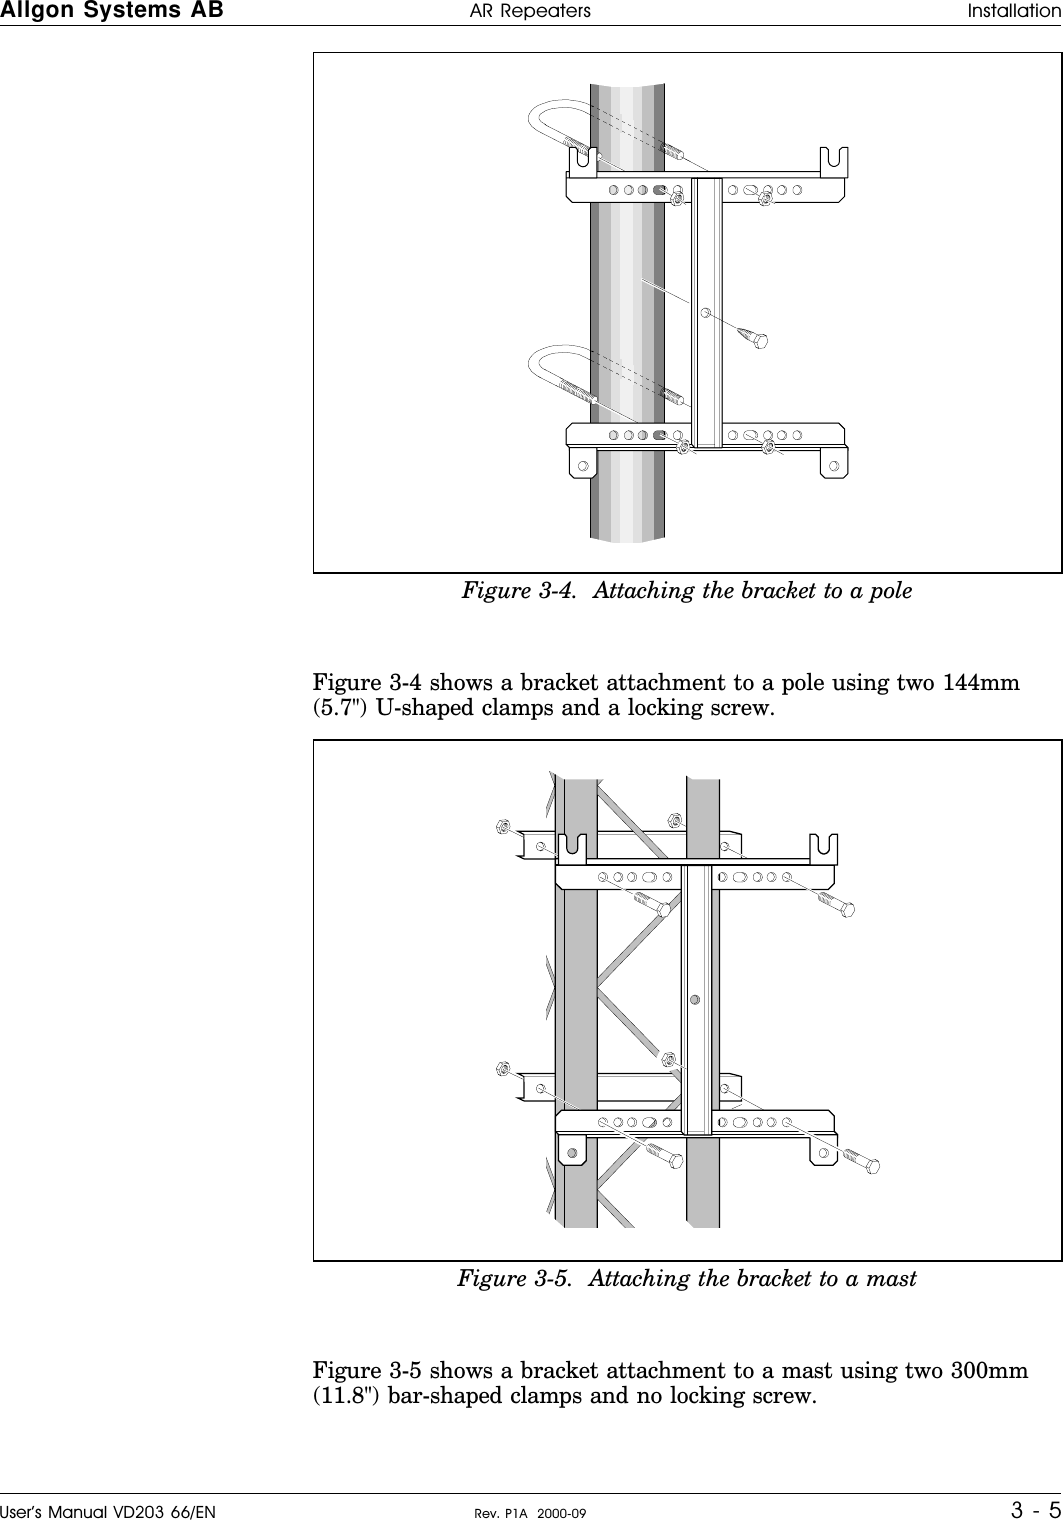    Figure 3-4 shows a bracket attachment to a pole using two 144mm(5.7&quot;) U-shaped clamps and a locking screw.Figure 3-5 shows a bracket attachment to a mast using two 300mm(11.8&quot;) bar-shaped clamps and no locking screw.Figure 3-4.  Attaching the bracket to a poleFigure 3-5.  Attaching the bracket to a mastAllgon Systems AB AR Repeaters InstallationUser’s Manual VD203 66/EN Rev. P1A  2000-09 3 - 5